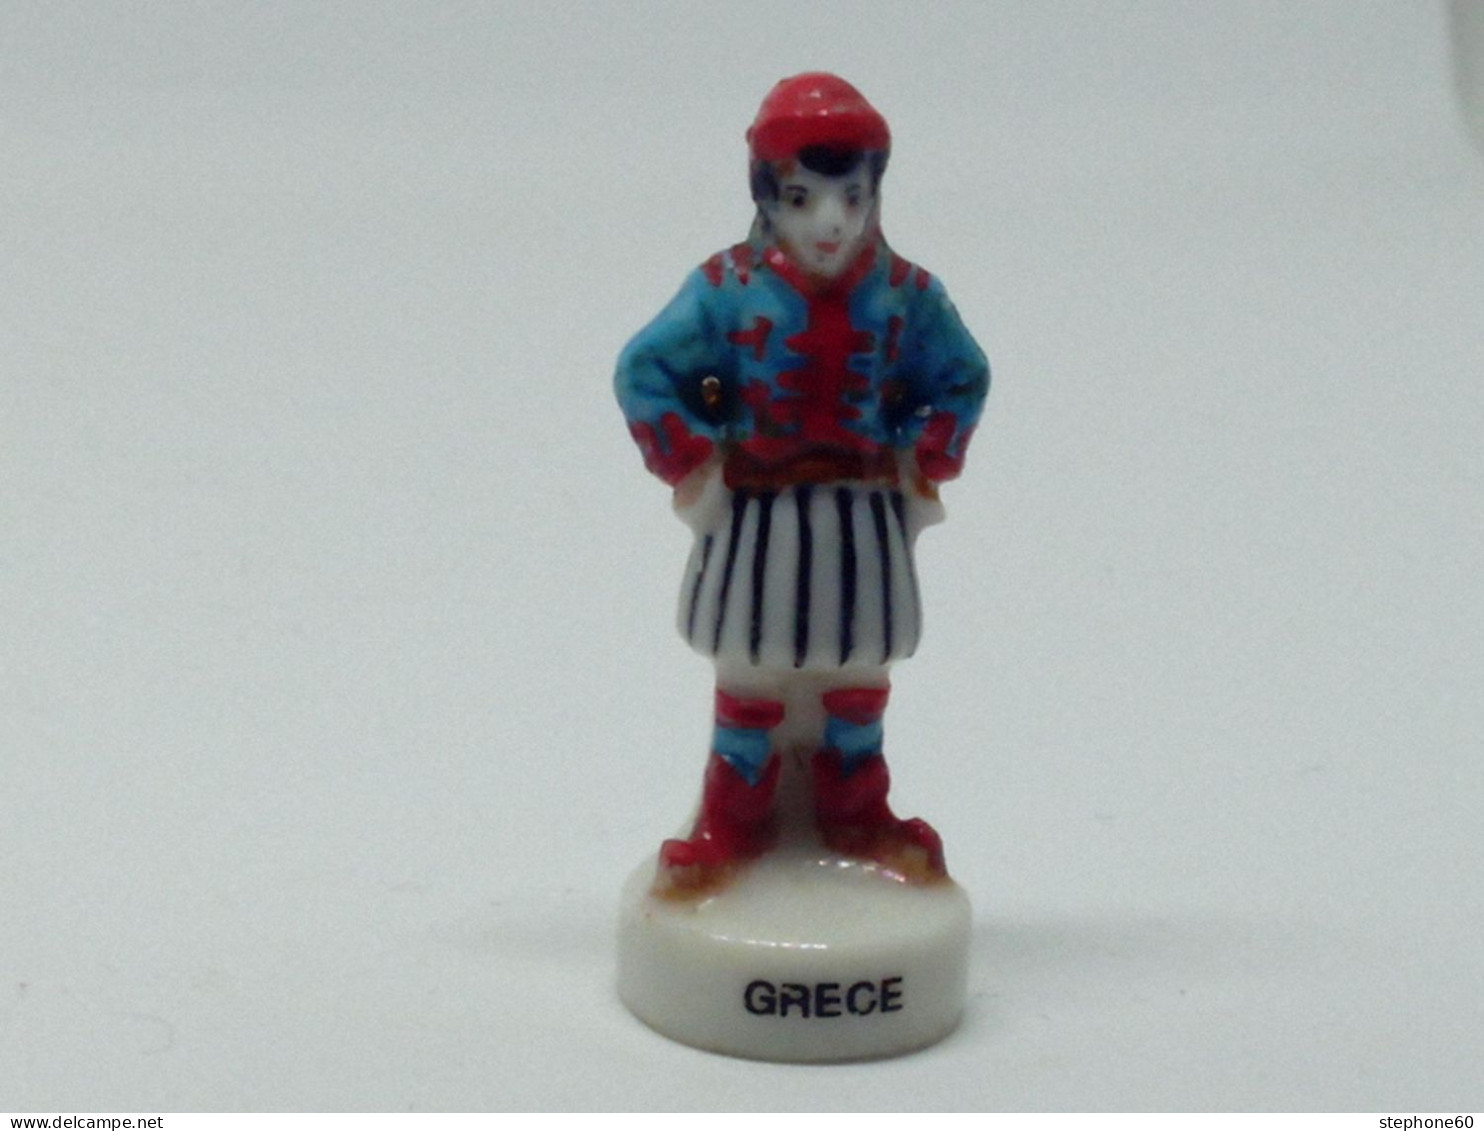 A002 - (34) Feve Pays Grece Personnage - Pays